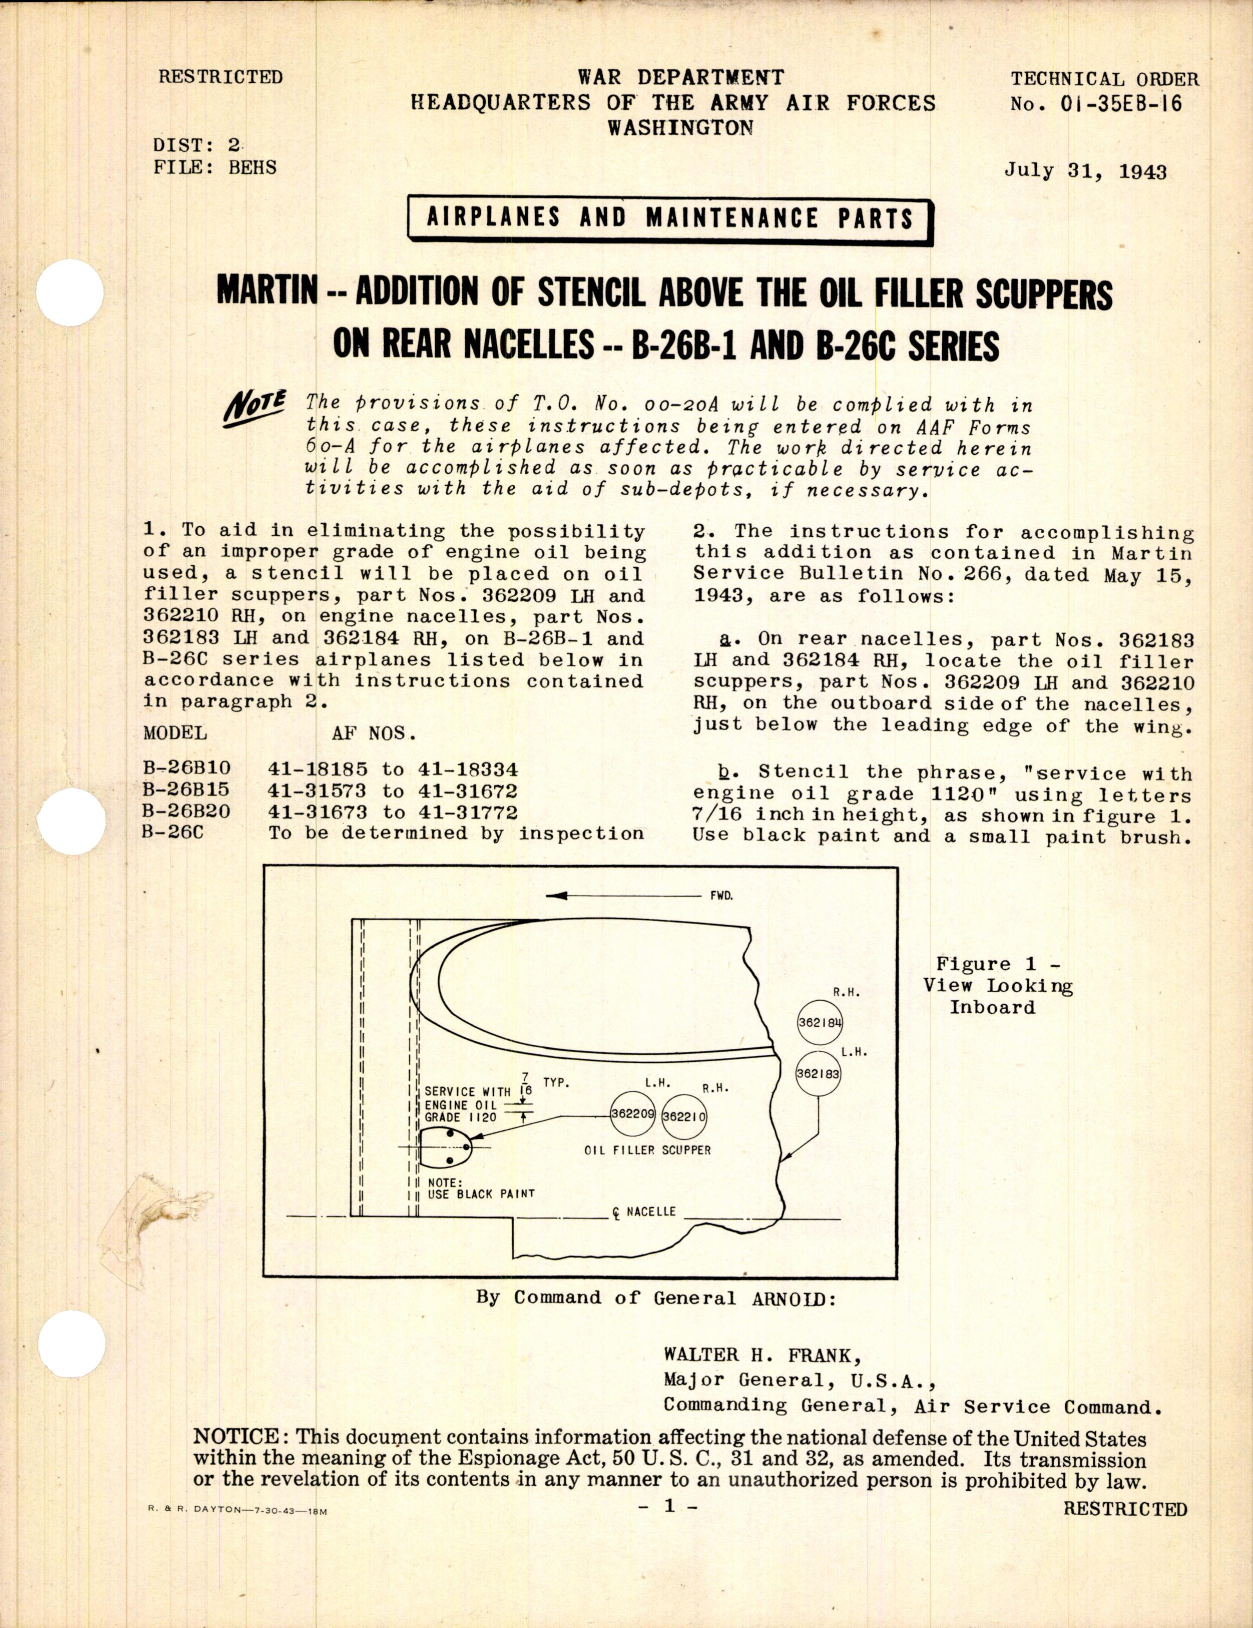 Sample page 1 from AirCorps Library document: Addition of Stencil Above the Oil Filler Scuppers on Rear Nacelles for B-26B-1 and B-26C Series